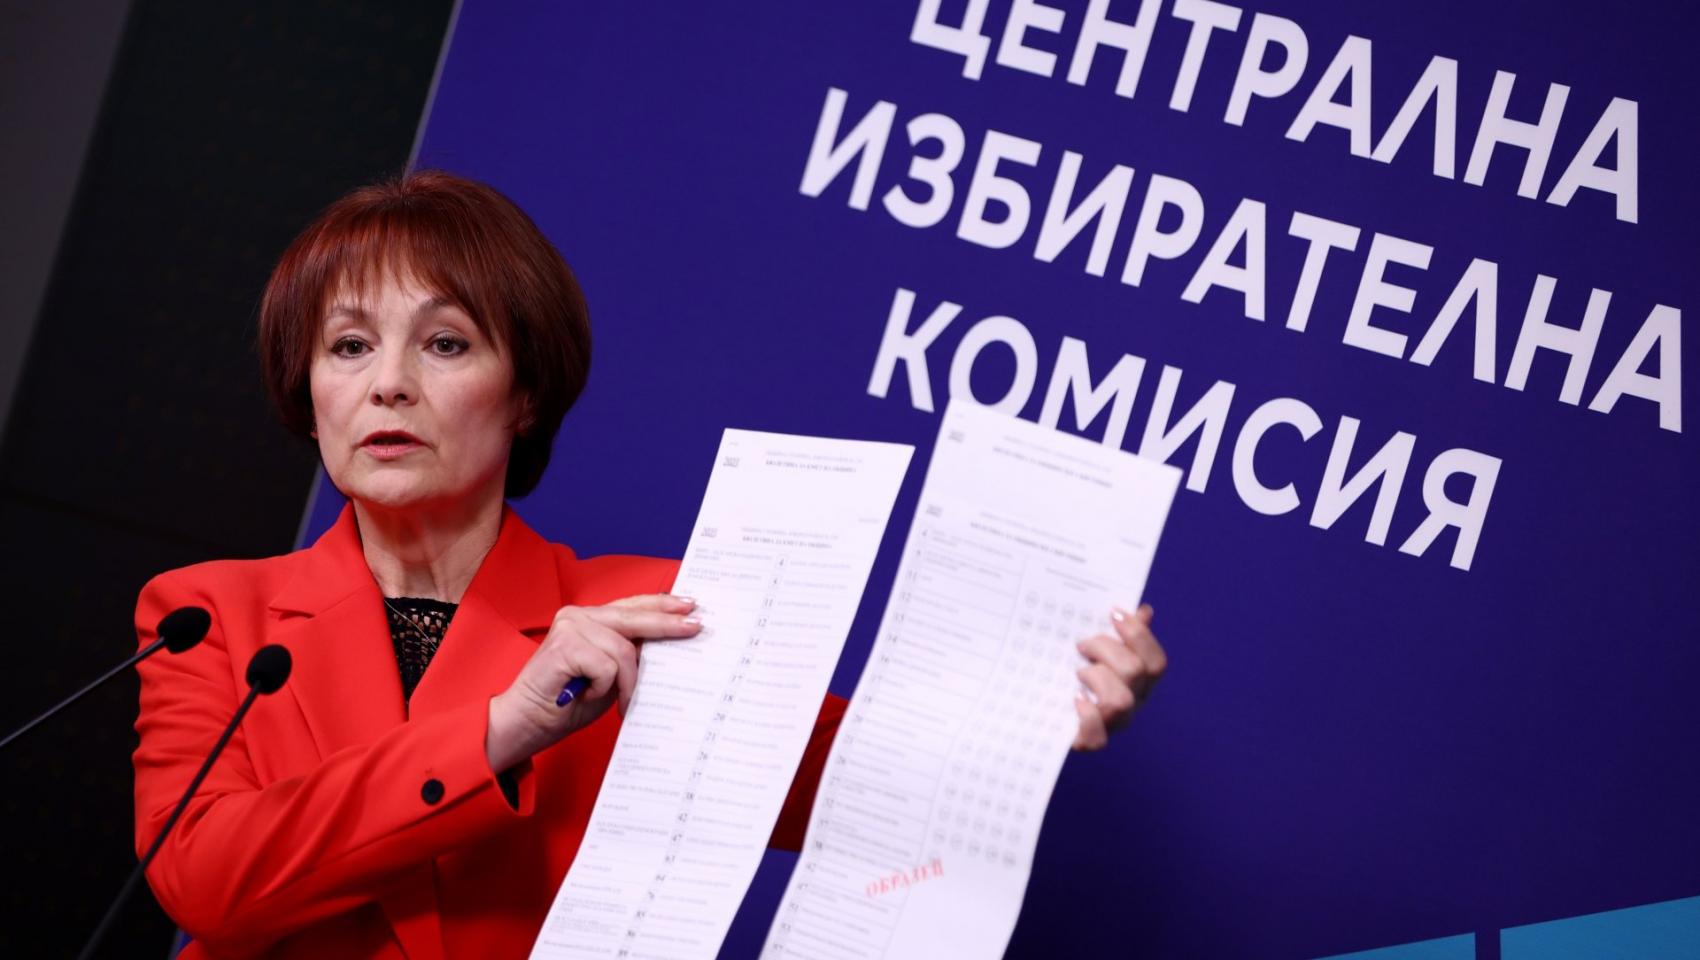 The Central Electoral Commission (CEC) decided that the local vote